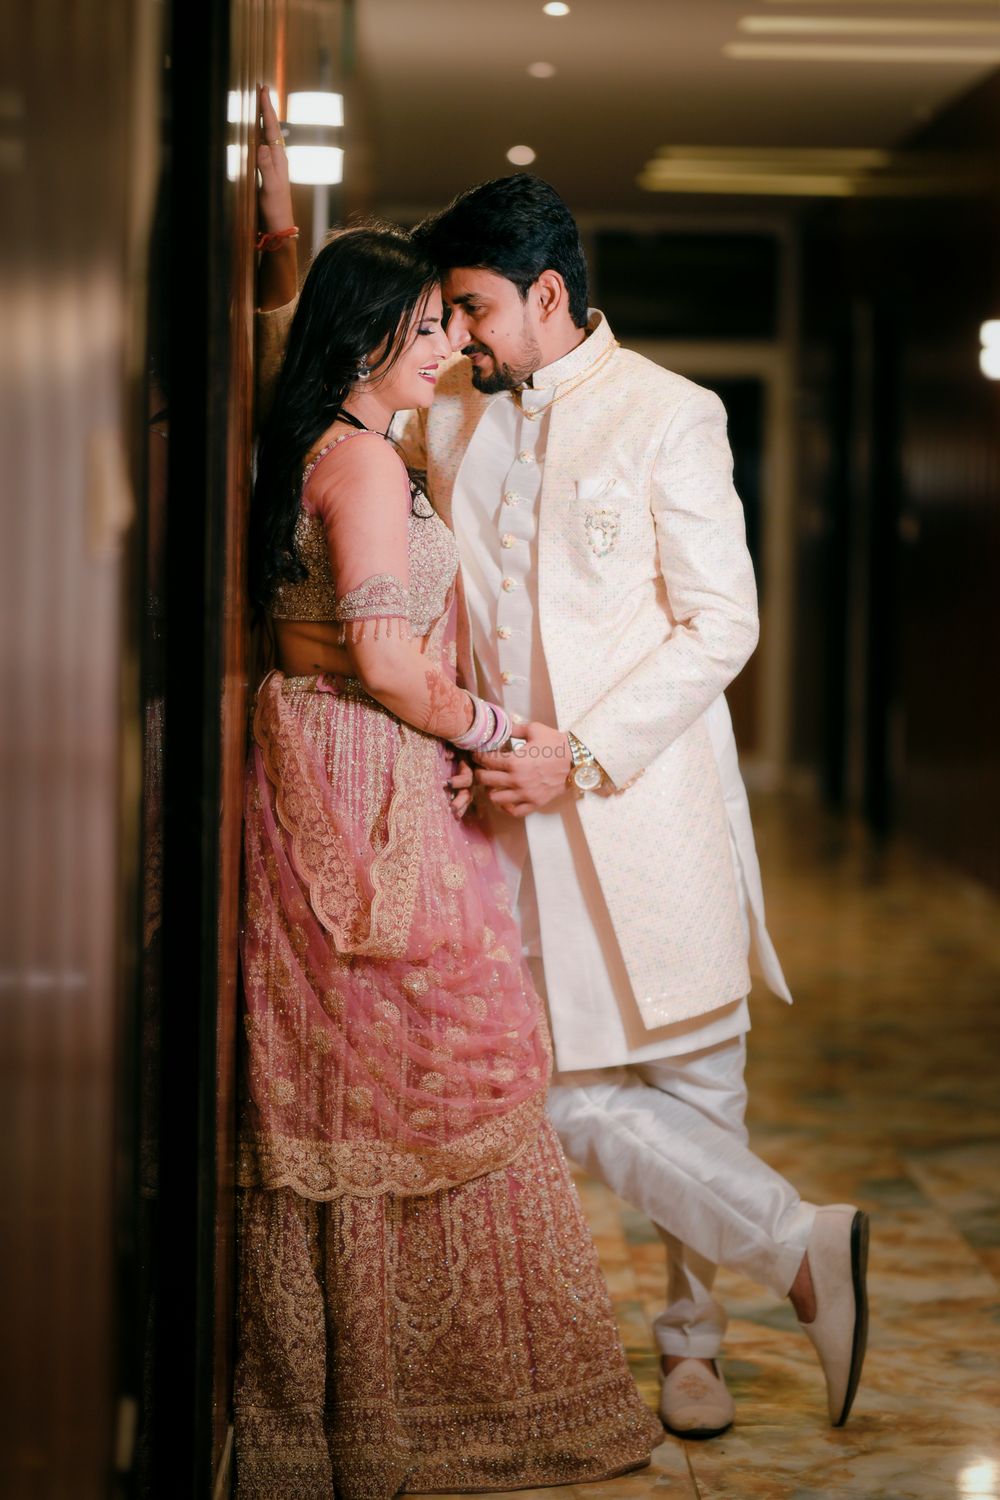 Photo From Engagement Shoot - By Memories By RK